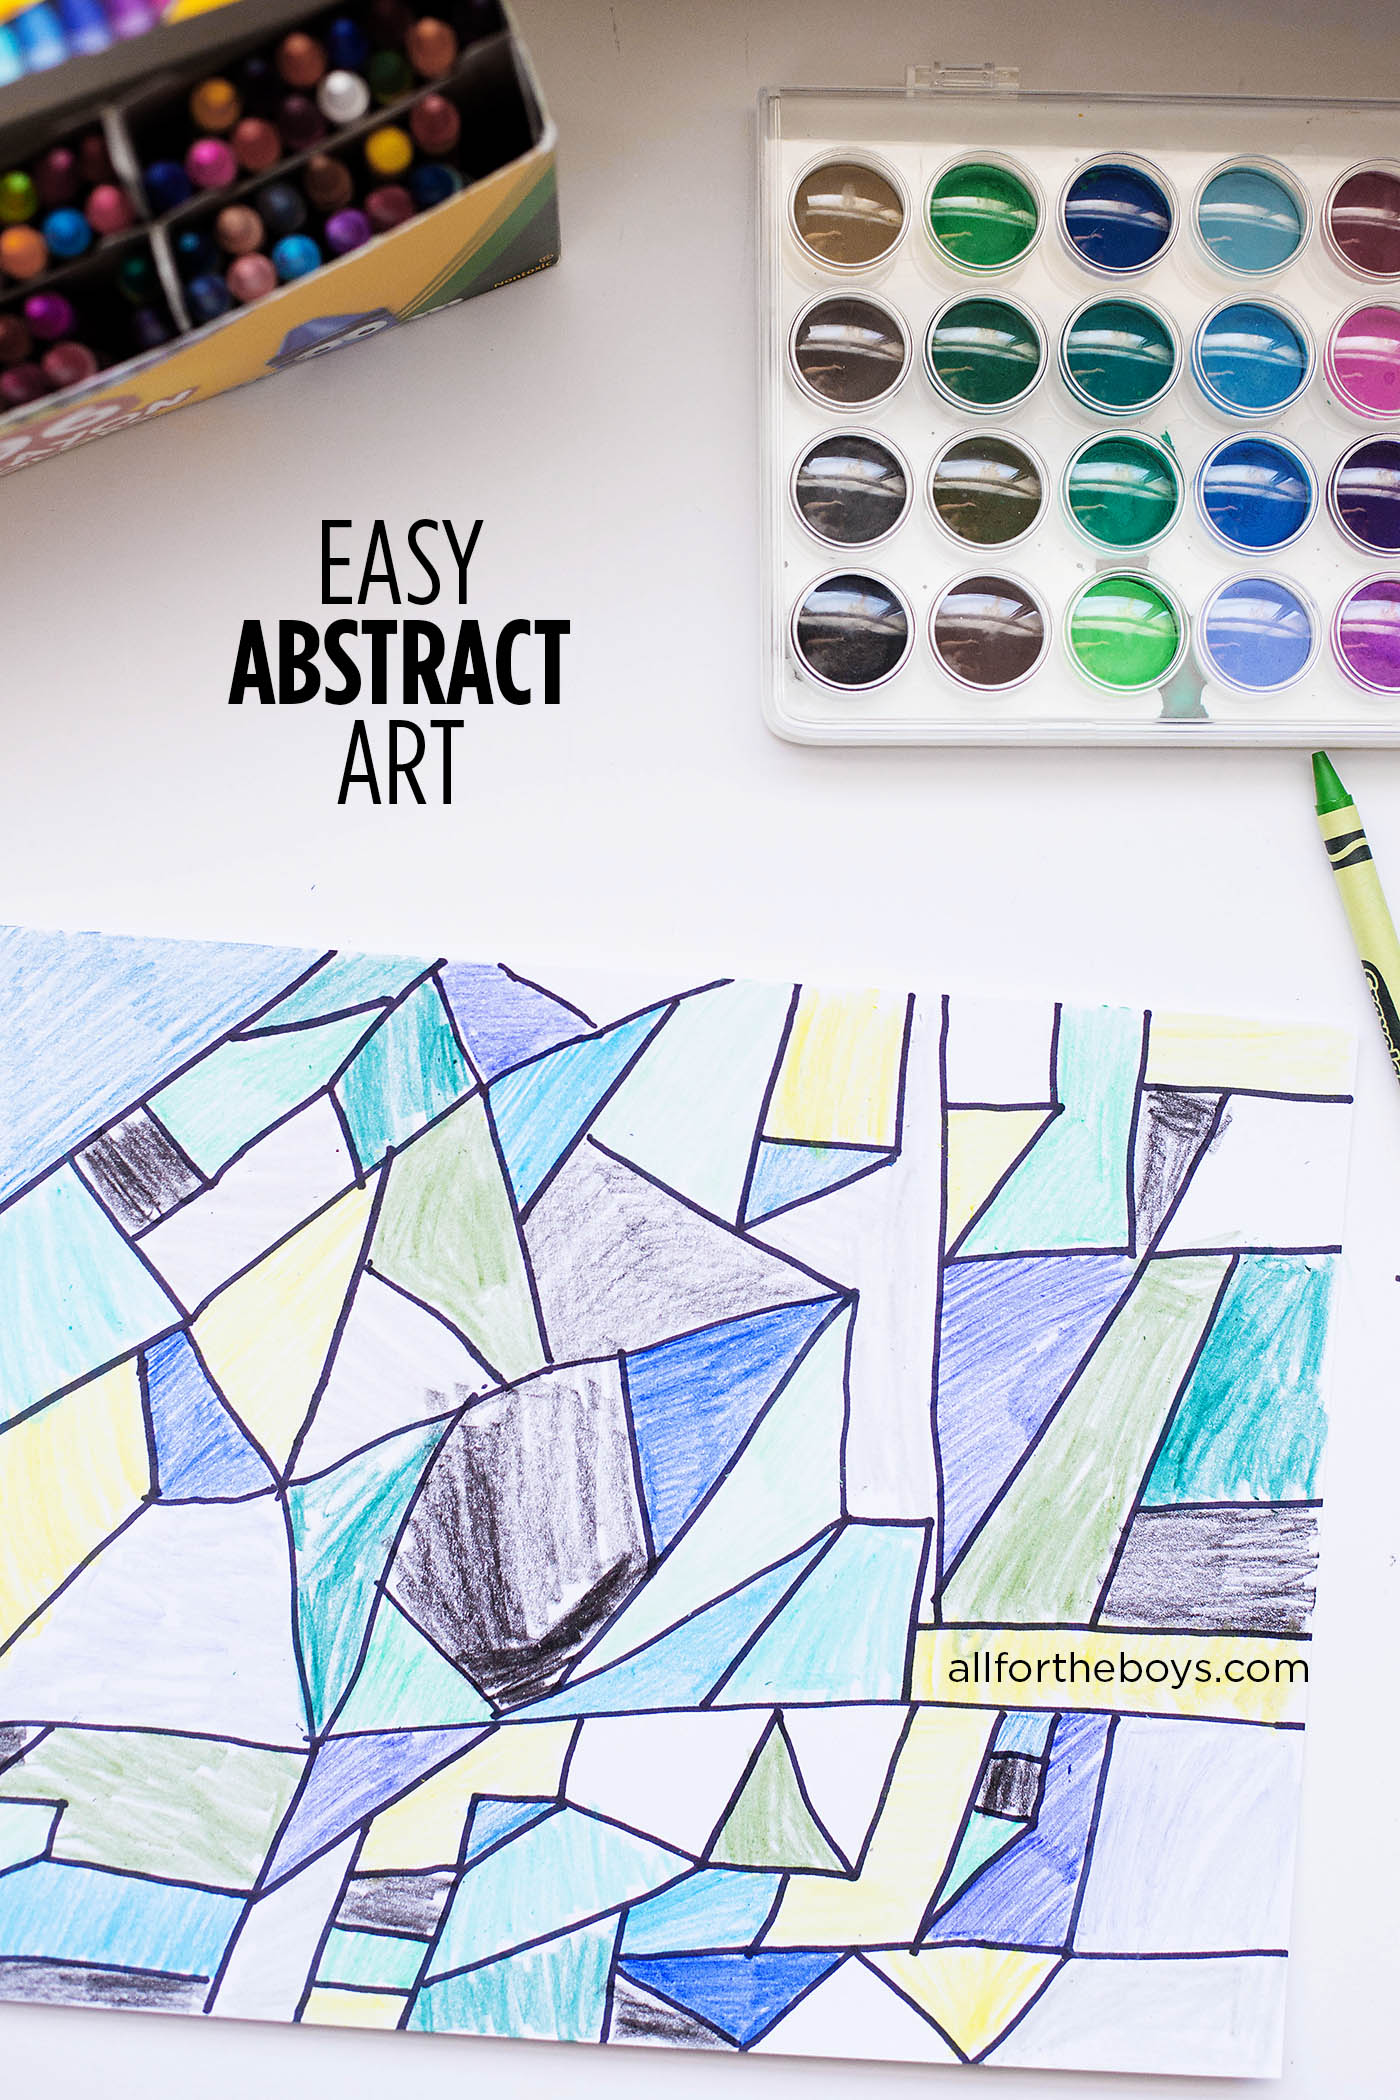 Easy Abstract Art - great idea for older kids too!